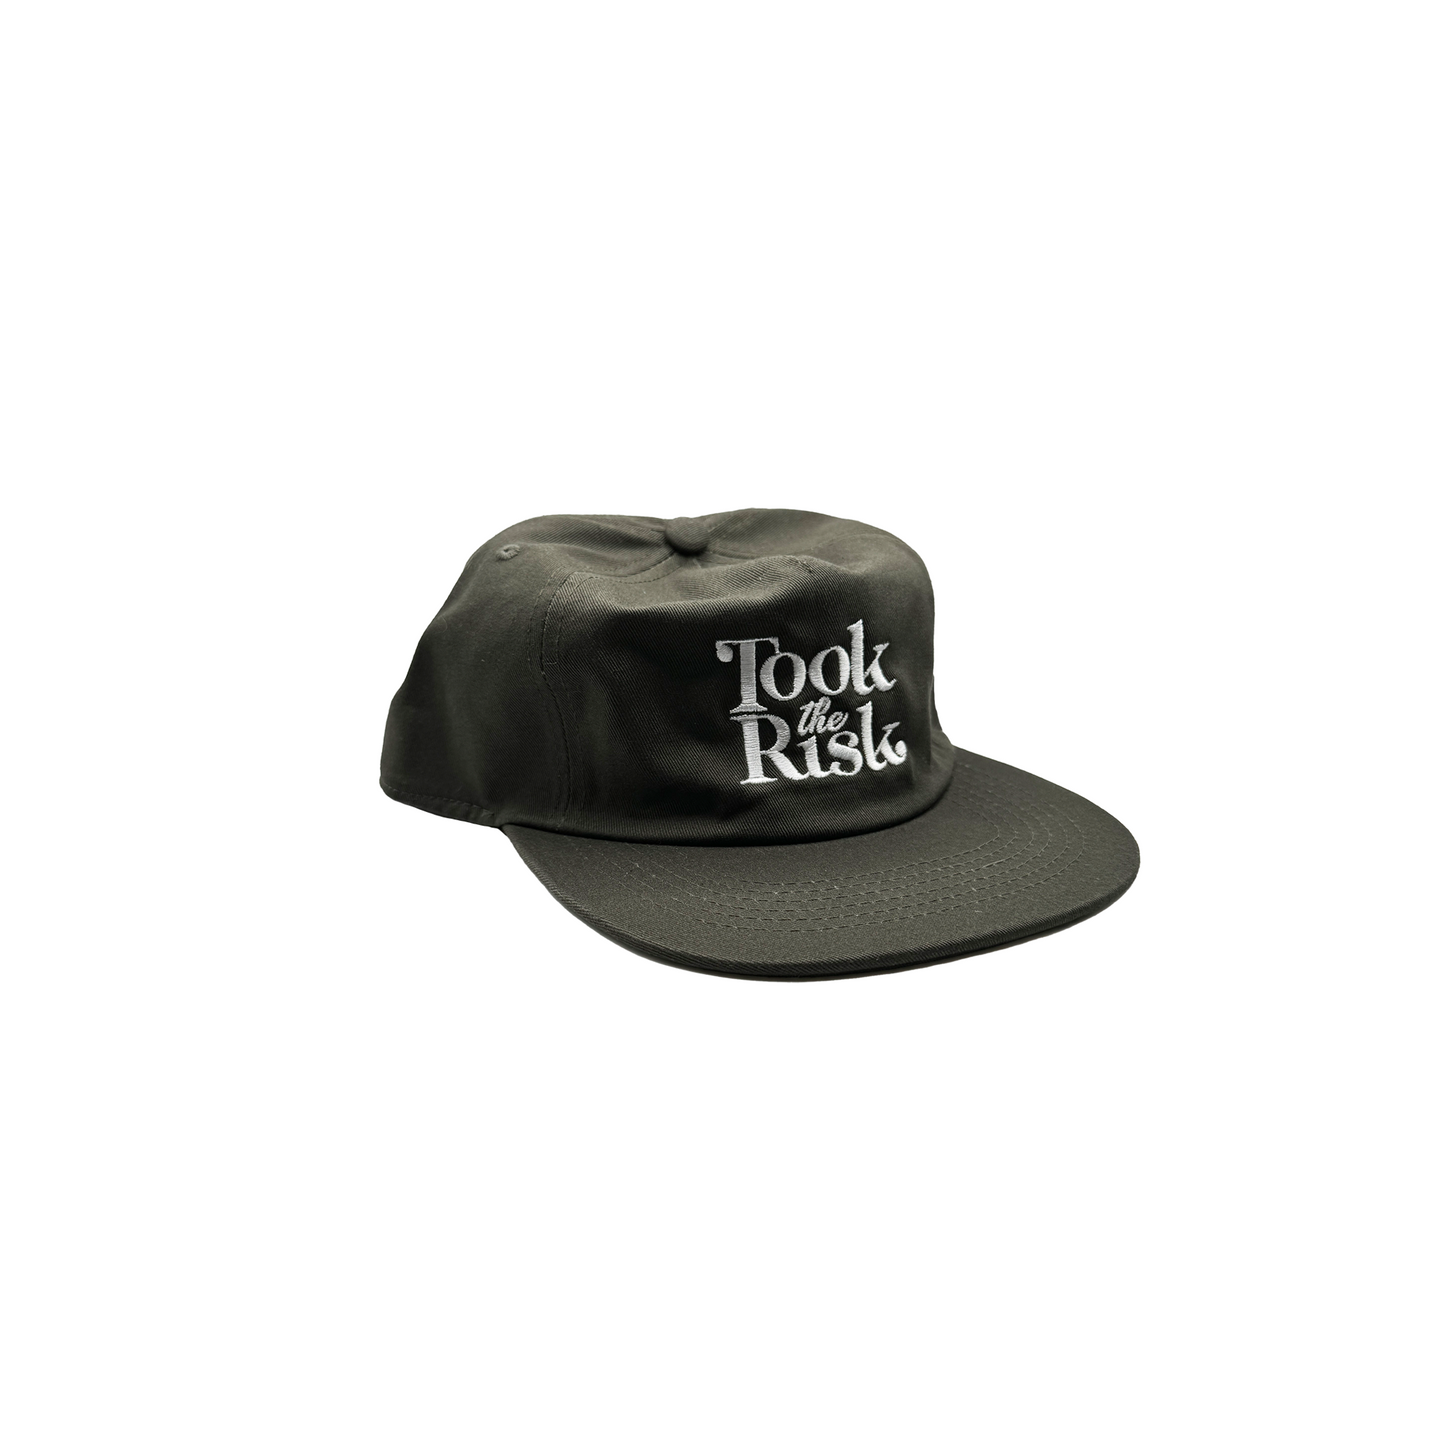 Took The Risk Hat (Olive)